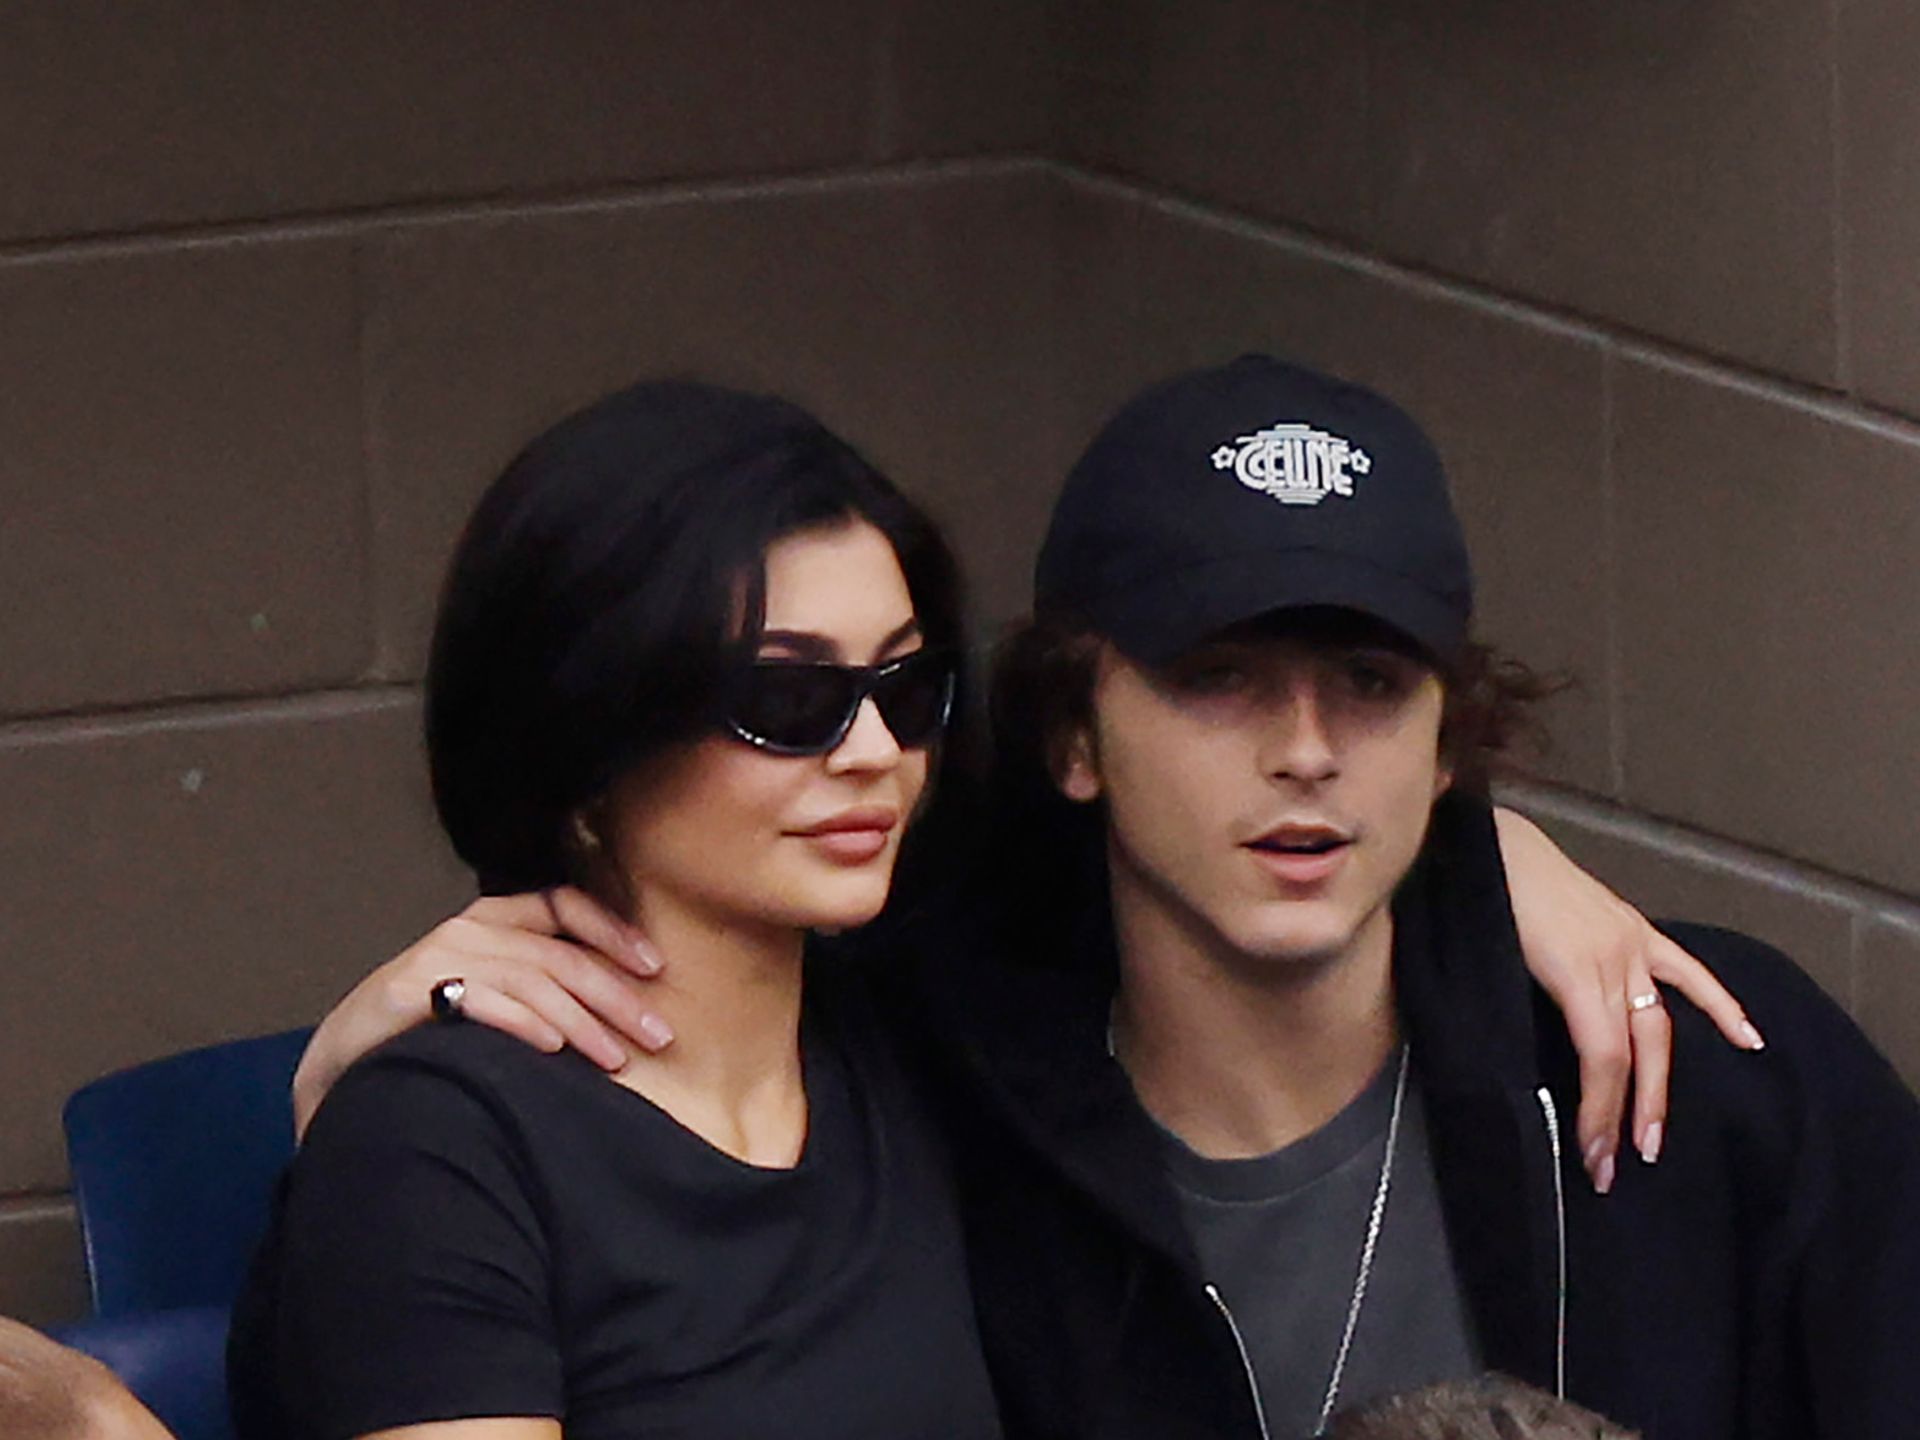 Kylie Jenner and Timothée Chalamet Valentine's Day Outfit